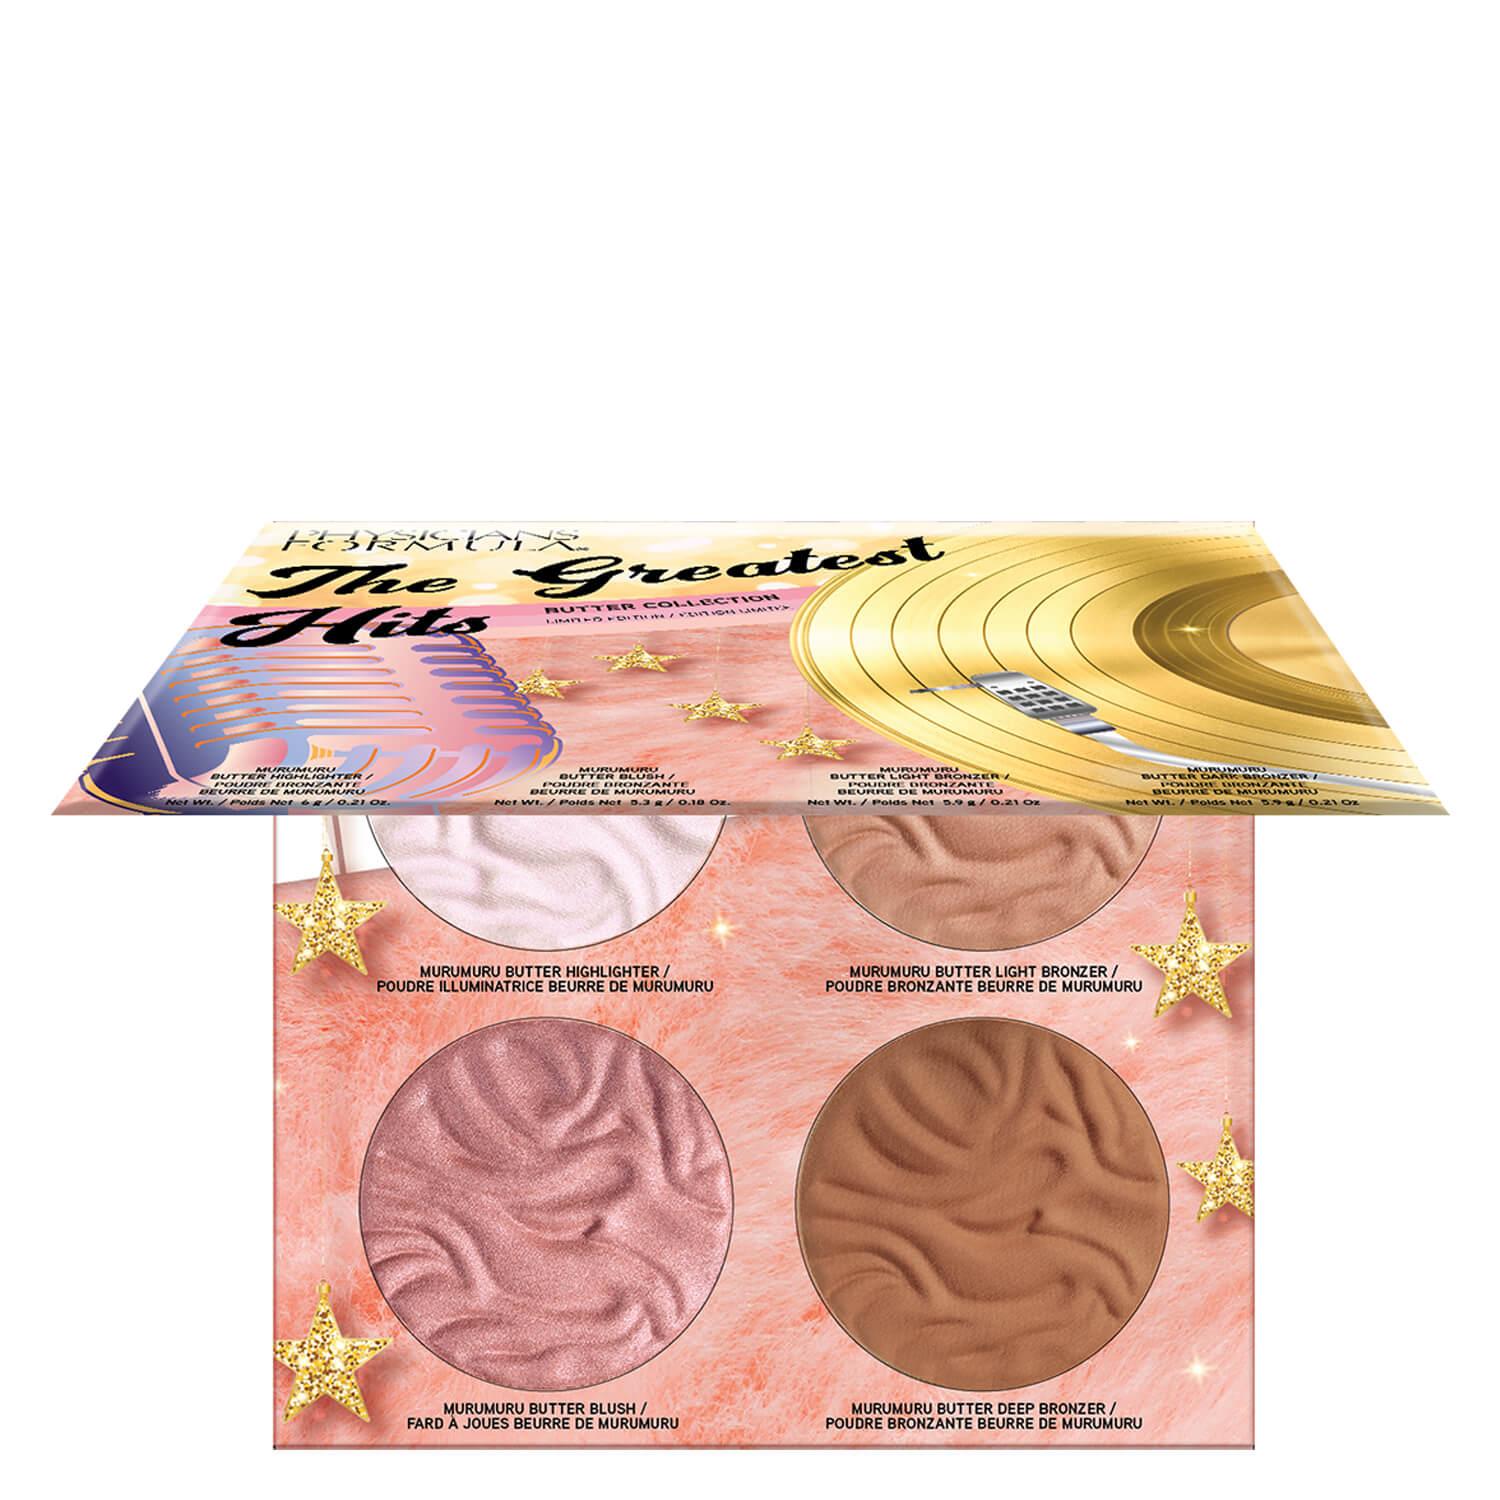 PHYSICIANS FORMULA - The Greatest Hits Butter Bronze and Glow Palette